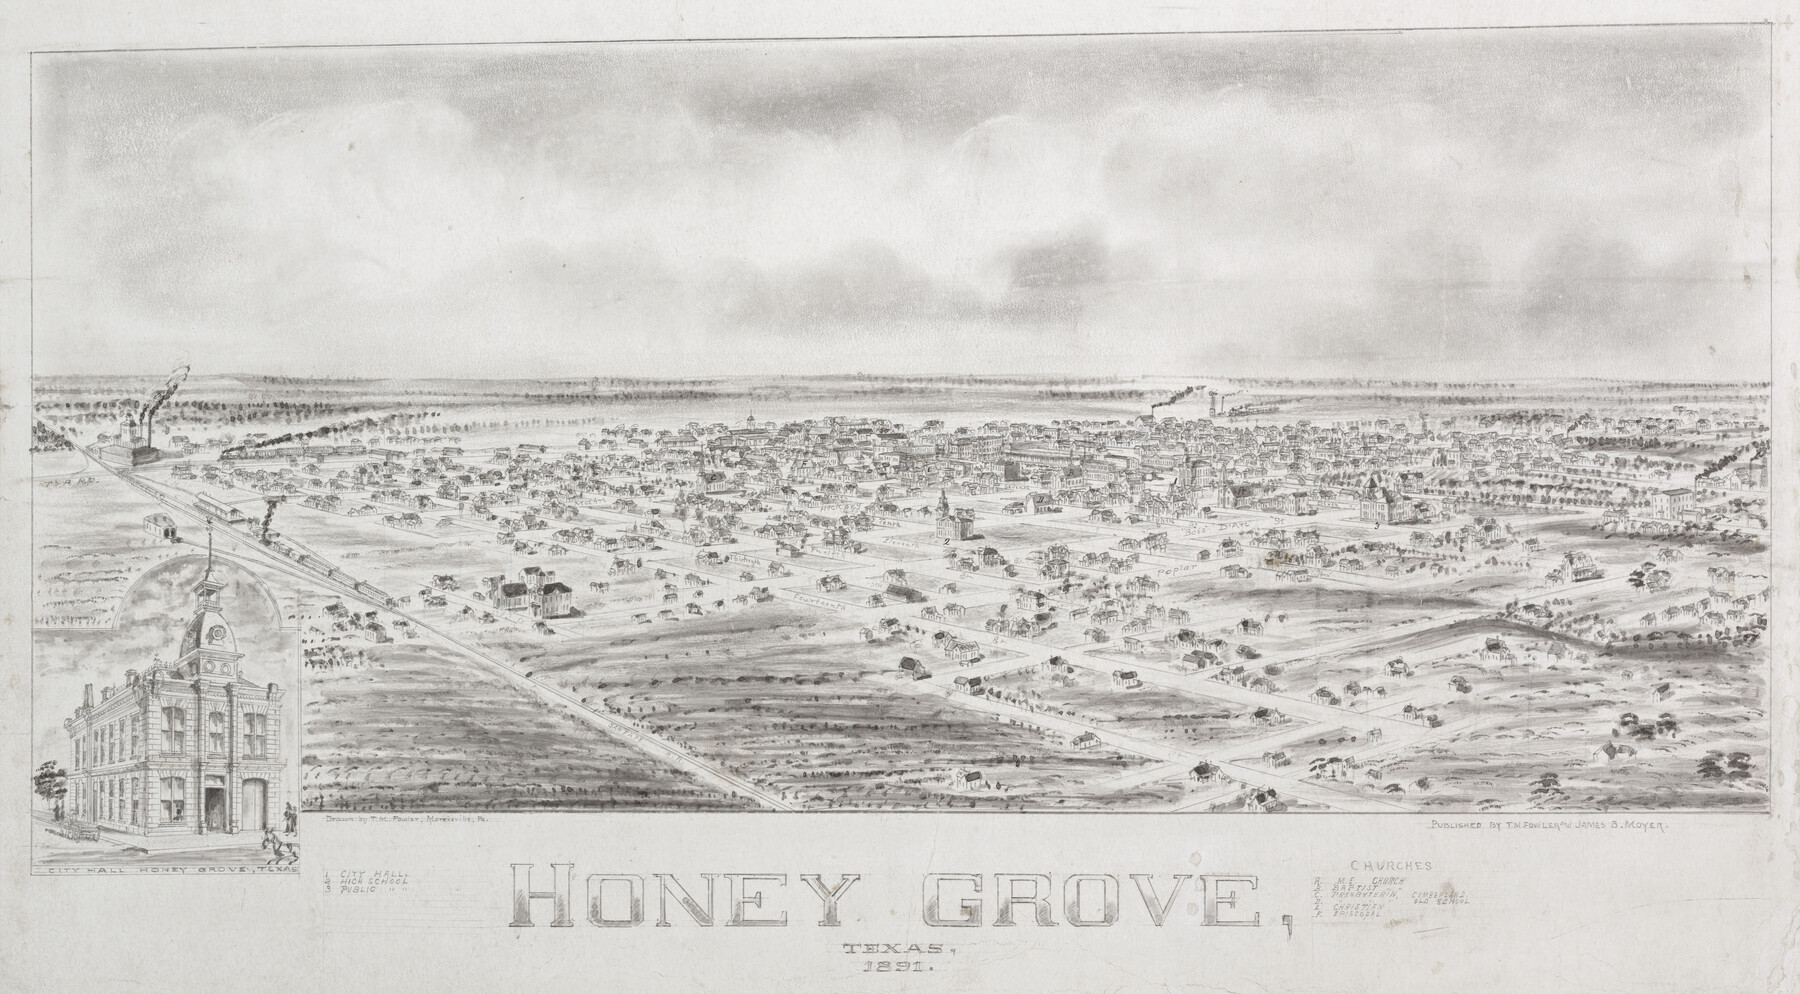 Perspective map of Fort Worth, Tex. 1891.